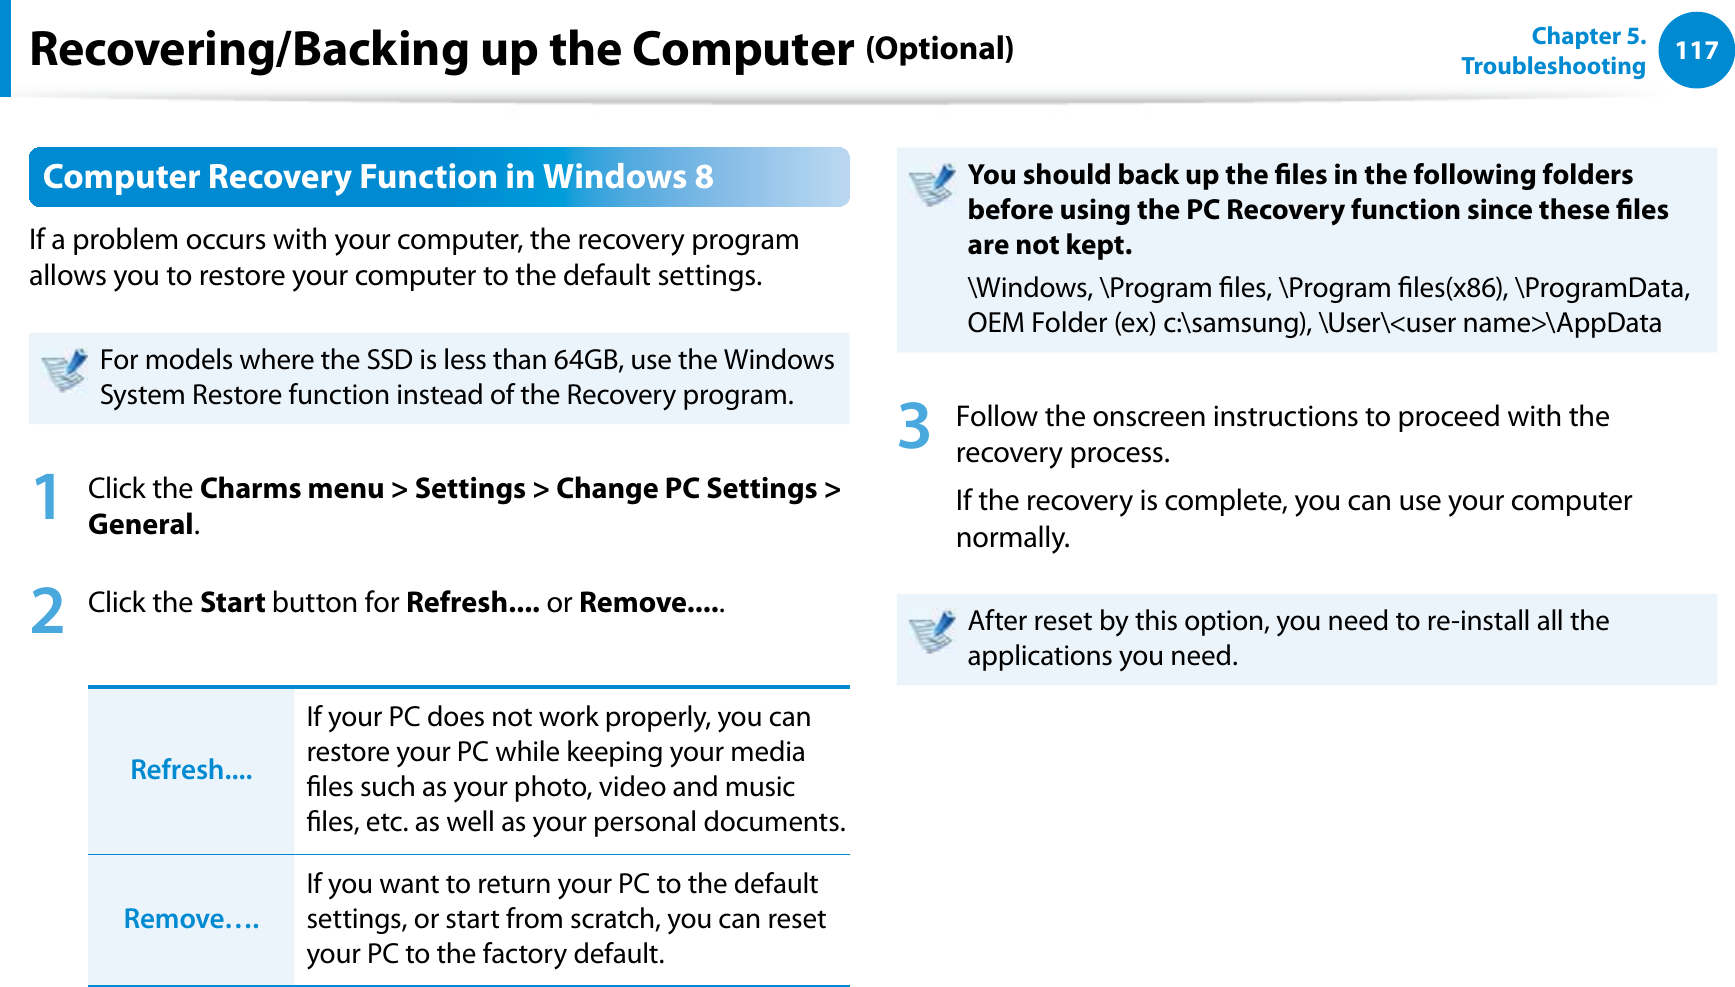 117Chapter 5.   TroubleshootingRecovering/Backing up the Computer (Optional)Computer Recovery Function in Windows 8If a problem occurs with your computer, the recovery program allows you to restore your computer to the default settings.For models where the SSD is less than 64GB, use the Windows System Restore function instead of the Recovery program. 1 Click the Charms menu &gt; Settings &gt; Change PC Settings &gt; General.2 Click the Start button for Refresh.... or Remove.....Refresh....If your PC does not work properly, you can restore your PC while keeping your media les such as your photo, video and music les, etc. as well as your personal documents. Remove….If you want to return your PC to the default settings, or start from scratch, you can reset your PC to the factory default. You should back up the les in the following folders before using the PC Recovery function since these les are not kept.\Windows, \Program les, \Program les(x86), \ProgramData, OEM Folder (ex) c:\samsung), \User\&lt;user name&gt;\AppData3  Follow the onscreen instructions to proceed with the recovery process.If the recovery is complete, you can use your computer normally.After reset by this option, you need to re-install all the applications you need.